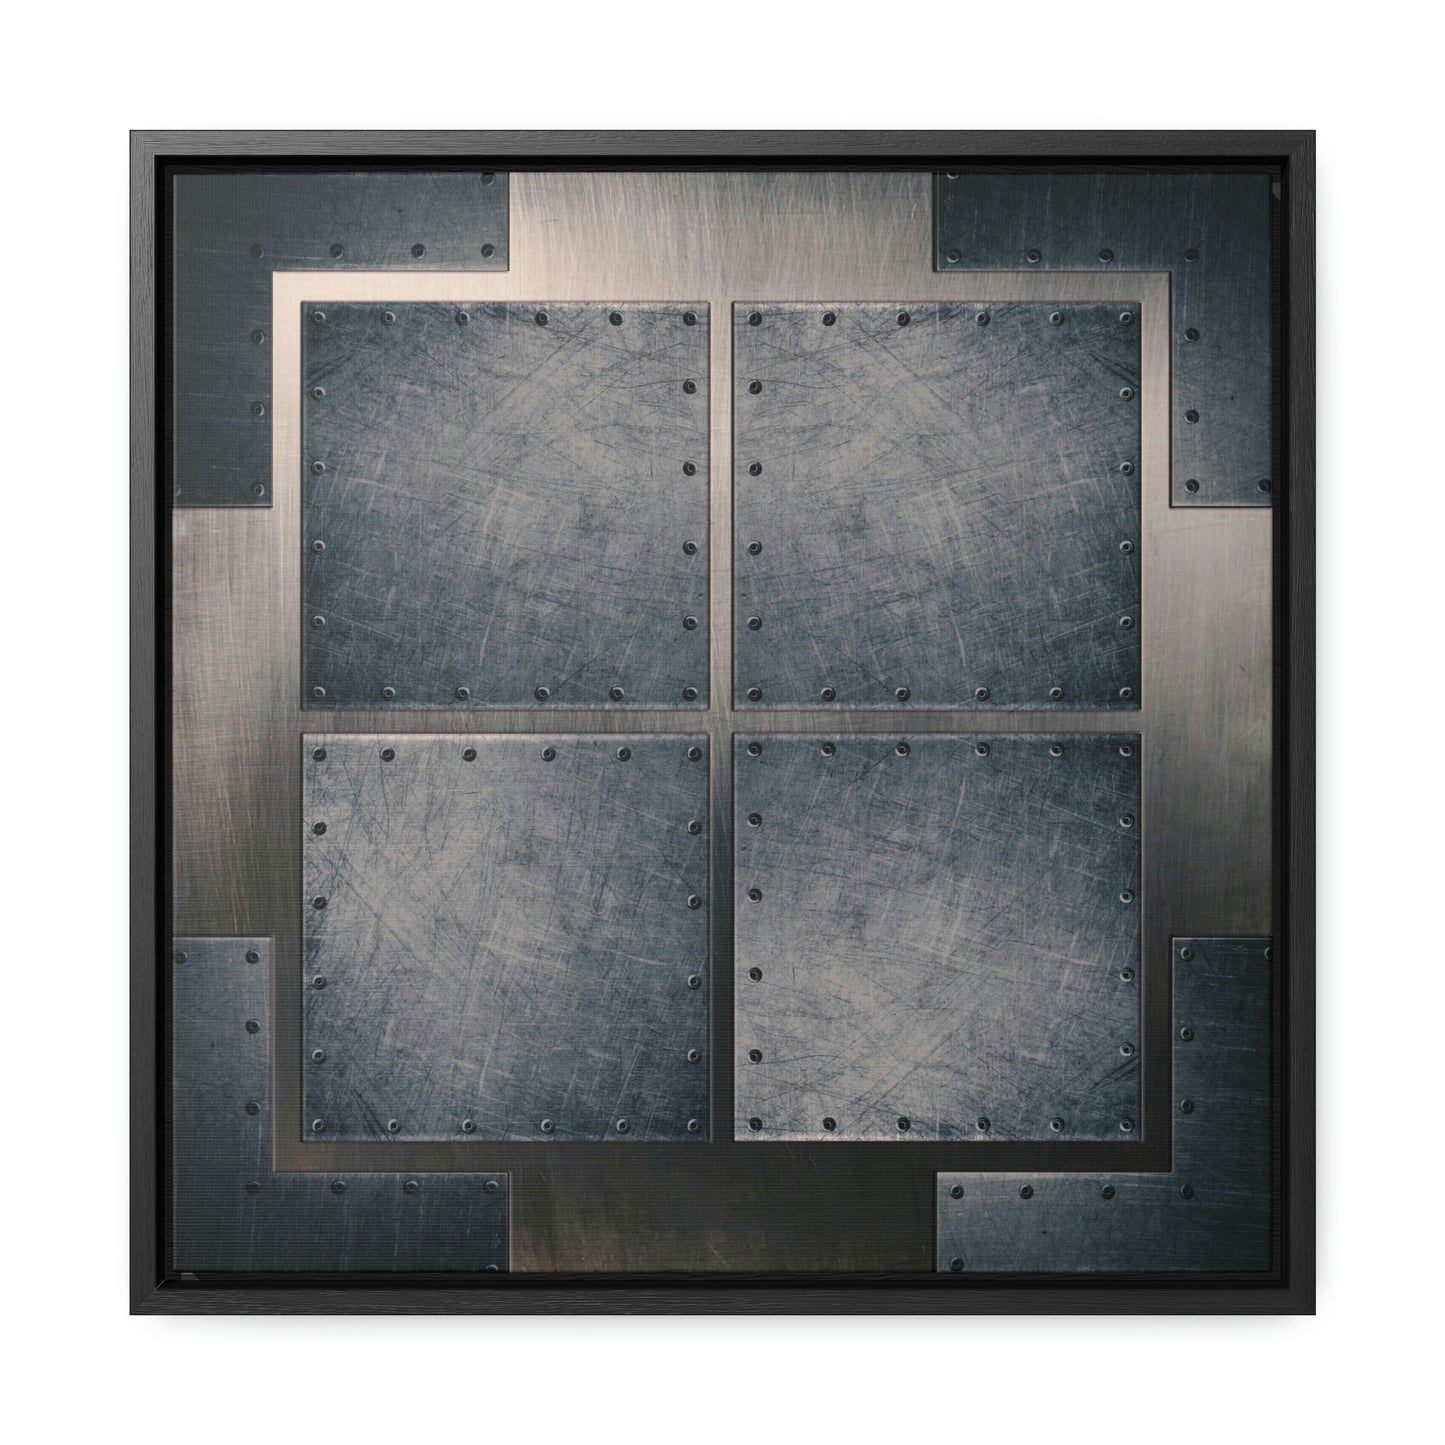 Industrial Themed Wall Decor - Distressed Steel Sheets Print on Canvas in a Floating Frame